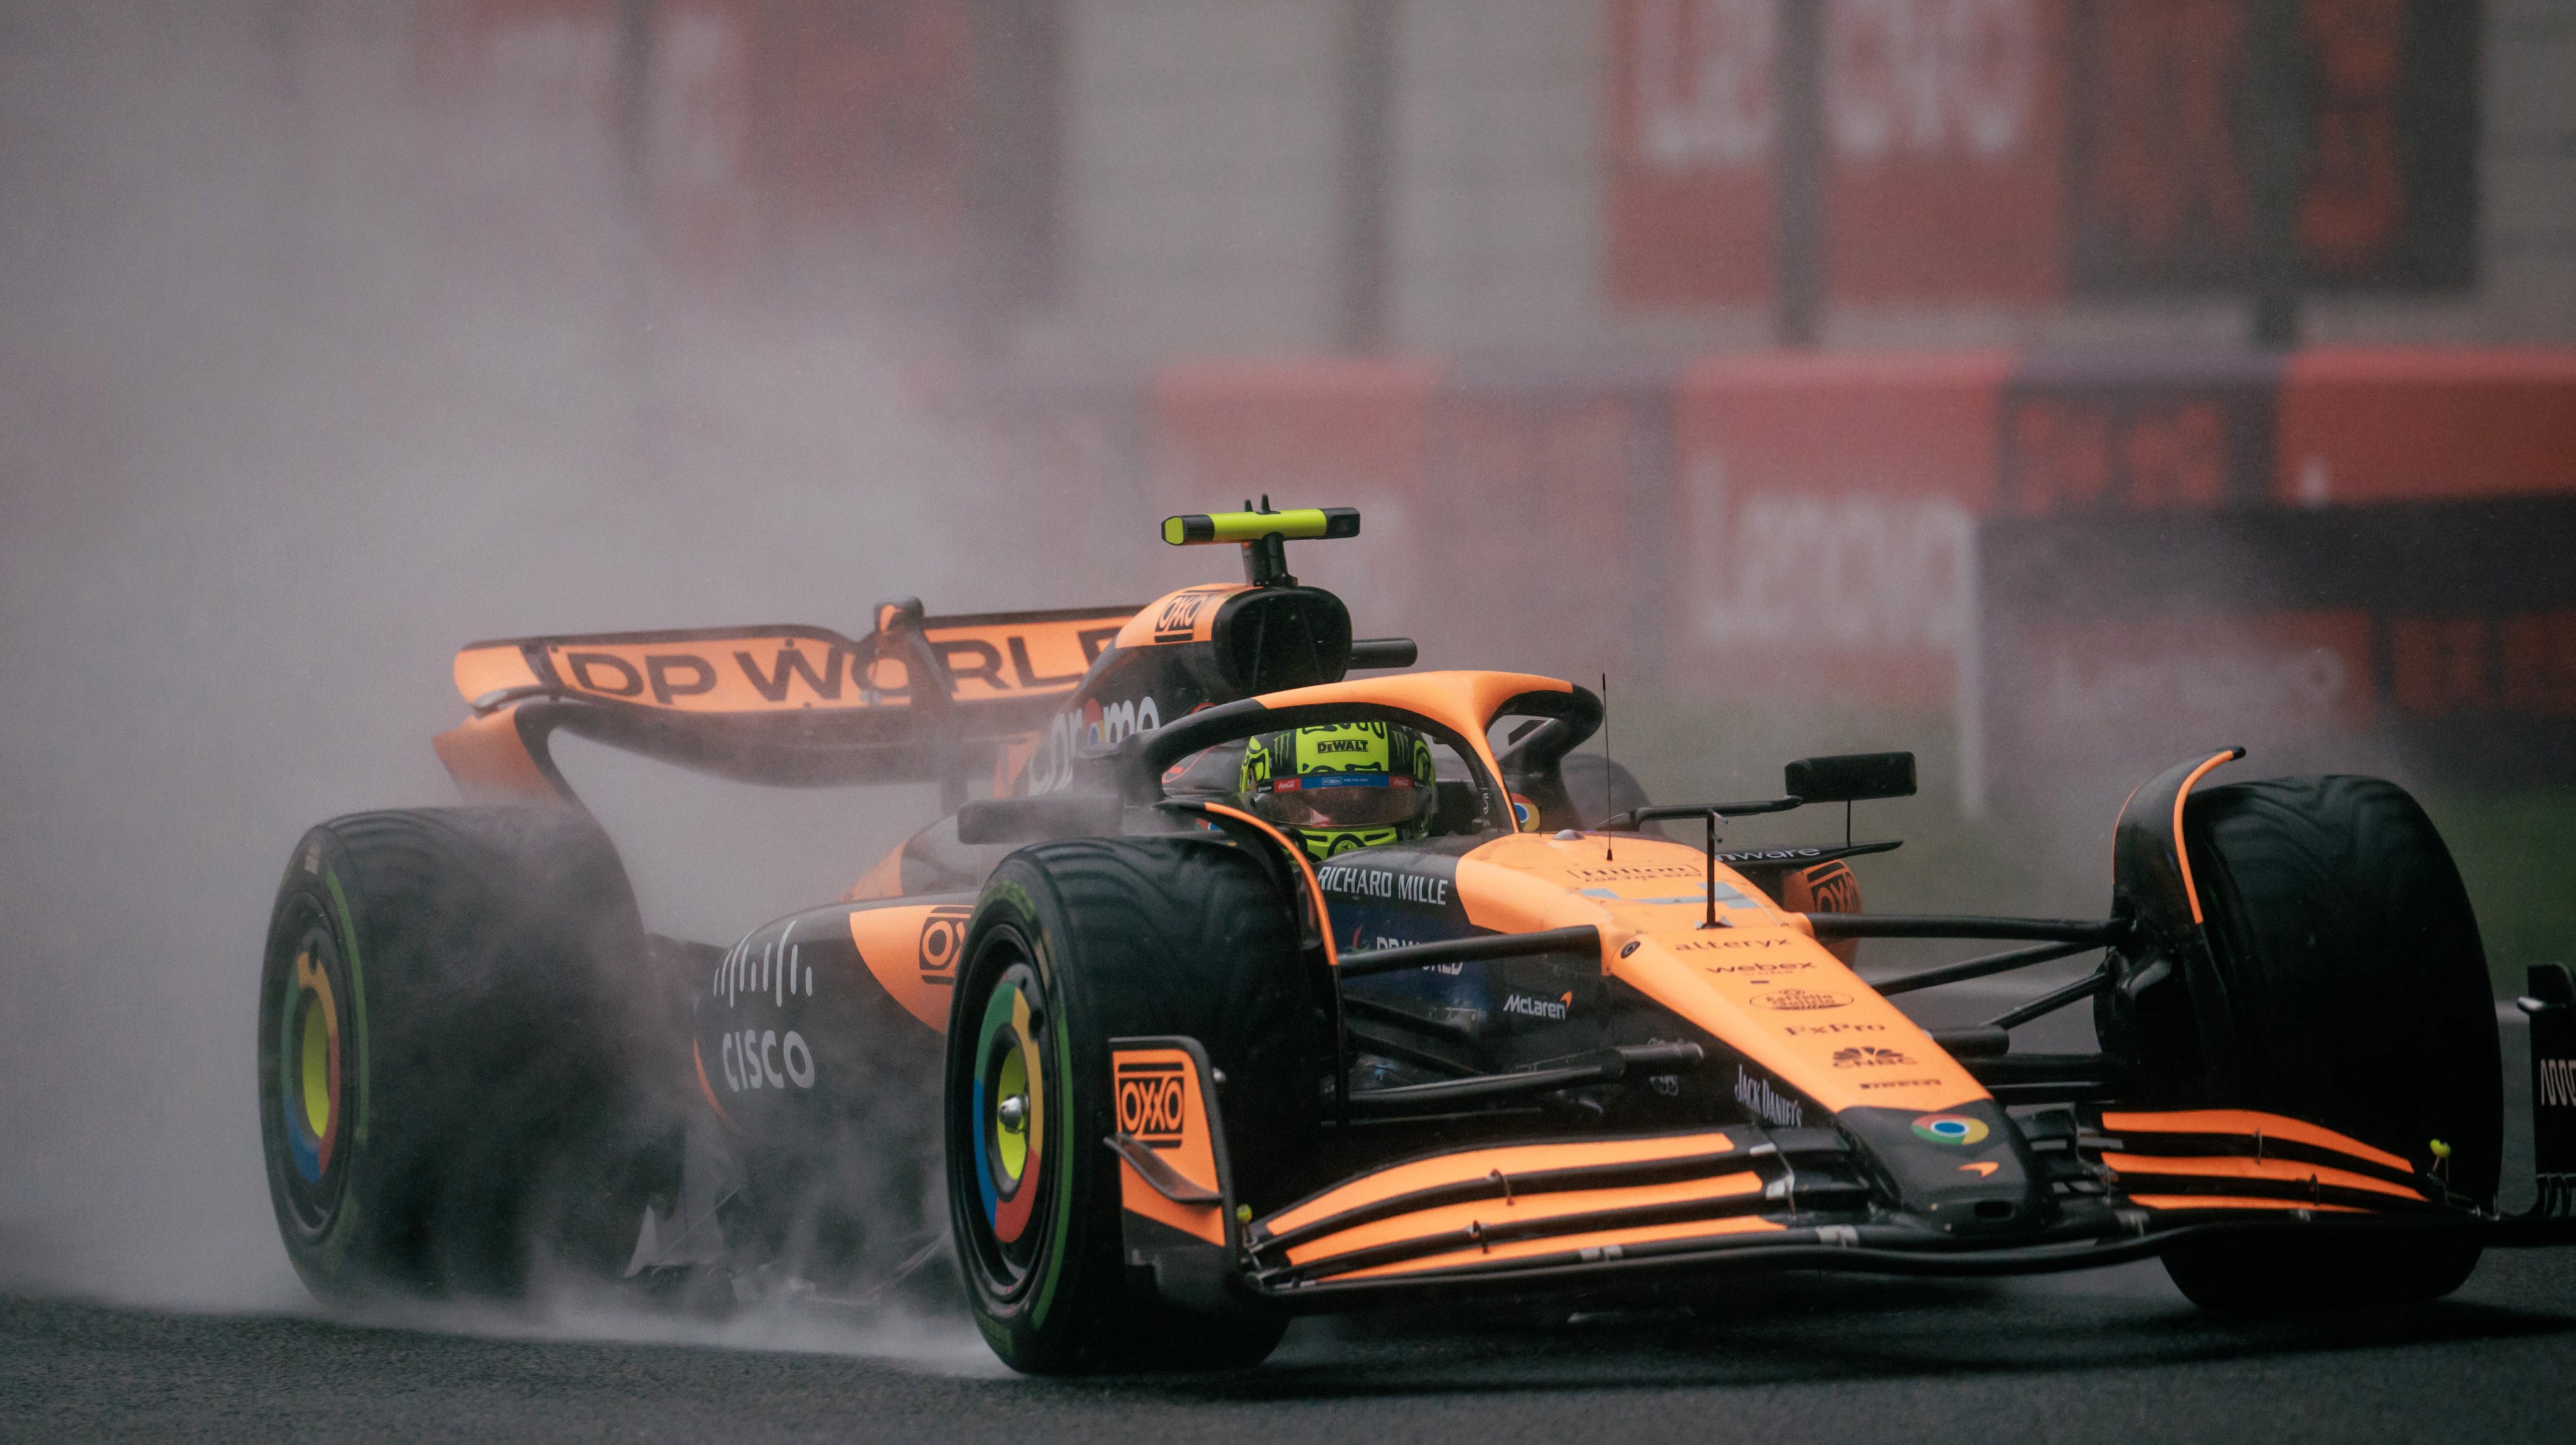 McLaren driver Lando Norris’ lap of one minute, 57.94 seconds was initially deleted for exceeding track limits, but was dramatically reinstated a minute later. Photo: EPA